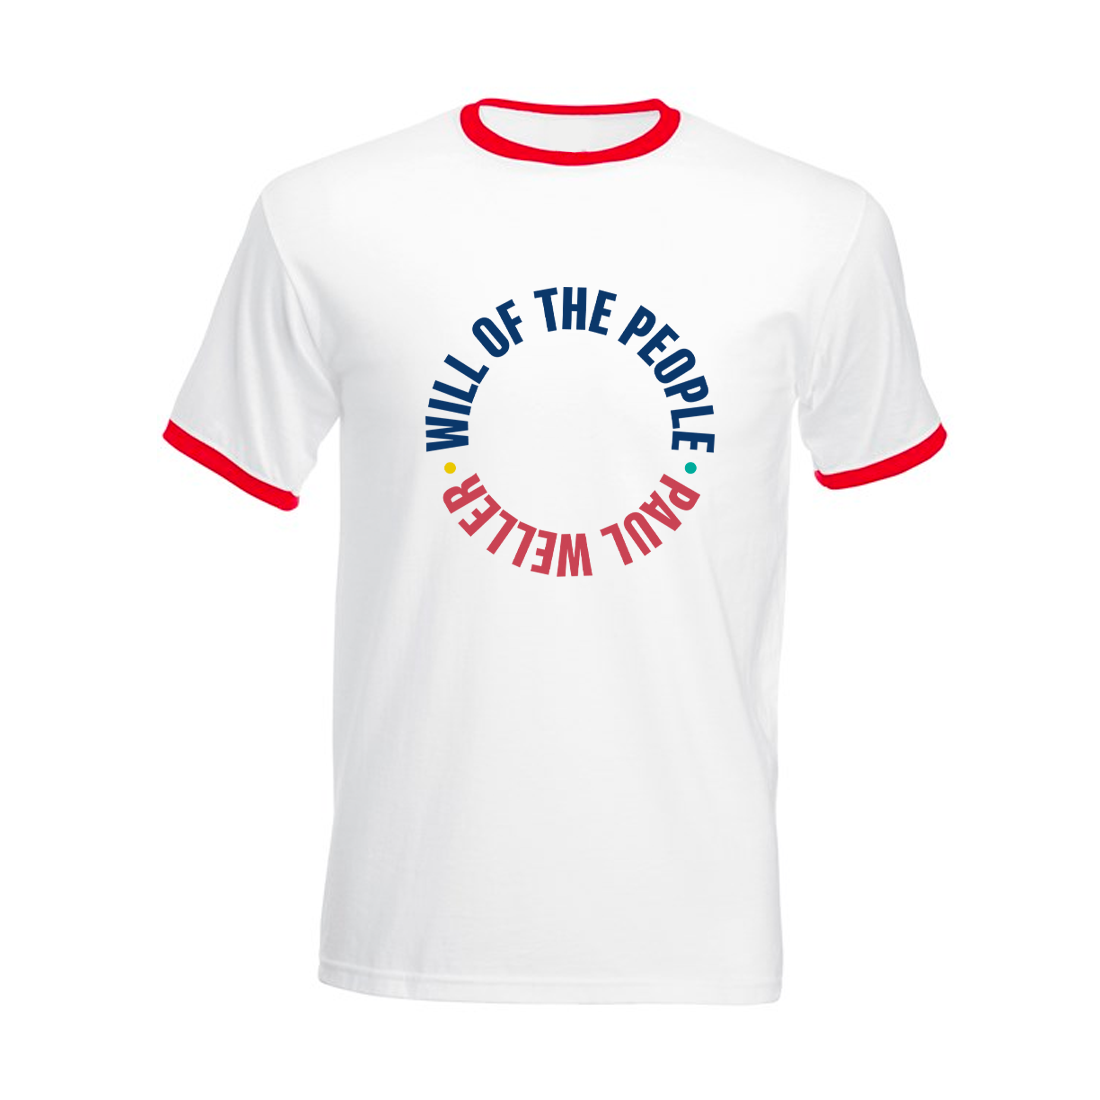 Paul Weller - Will of the People Ringer T-Shirt